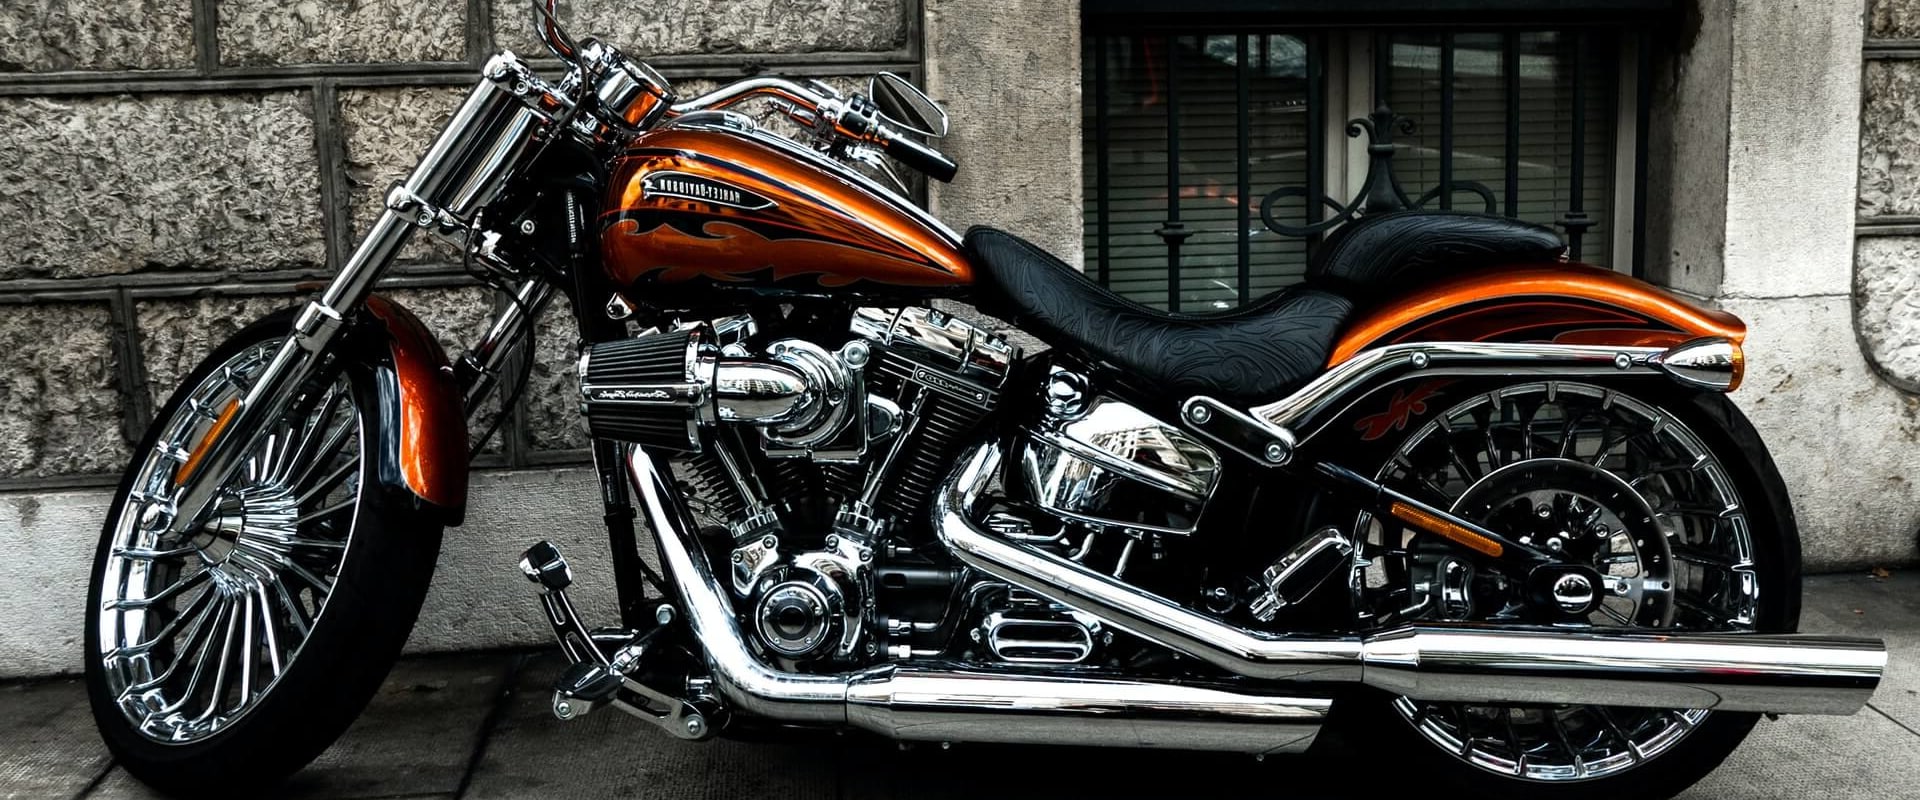 Motorcycle Custom Exhausts: Everything You Need to Know